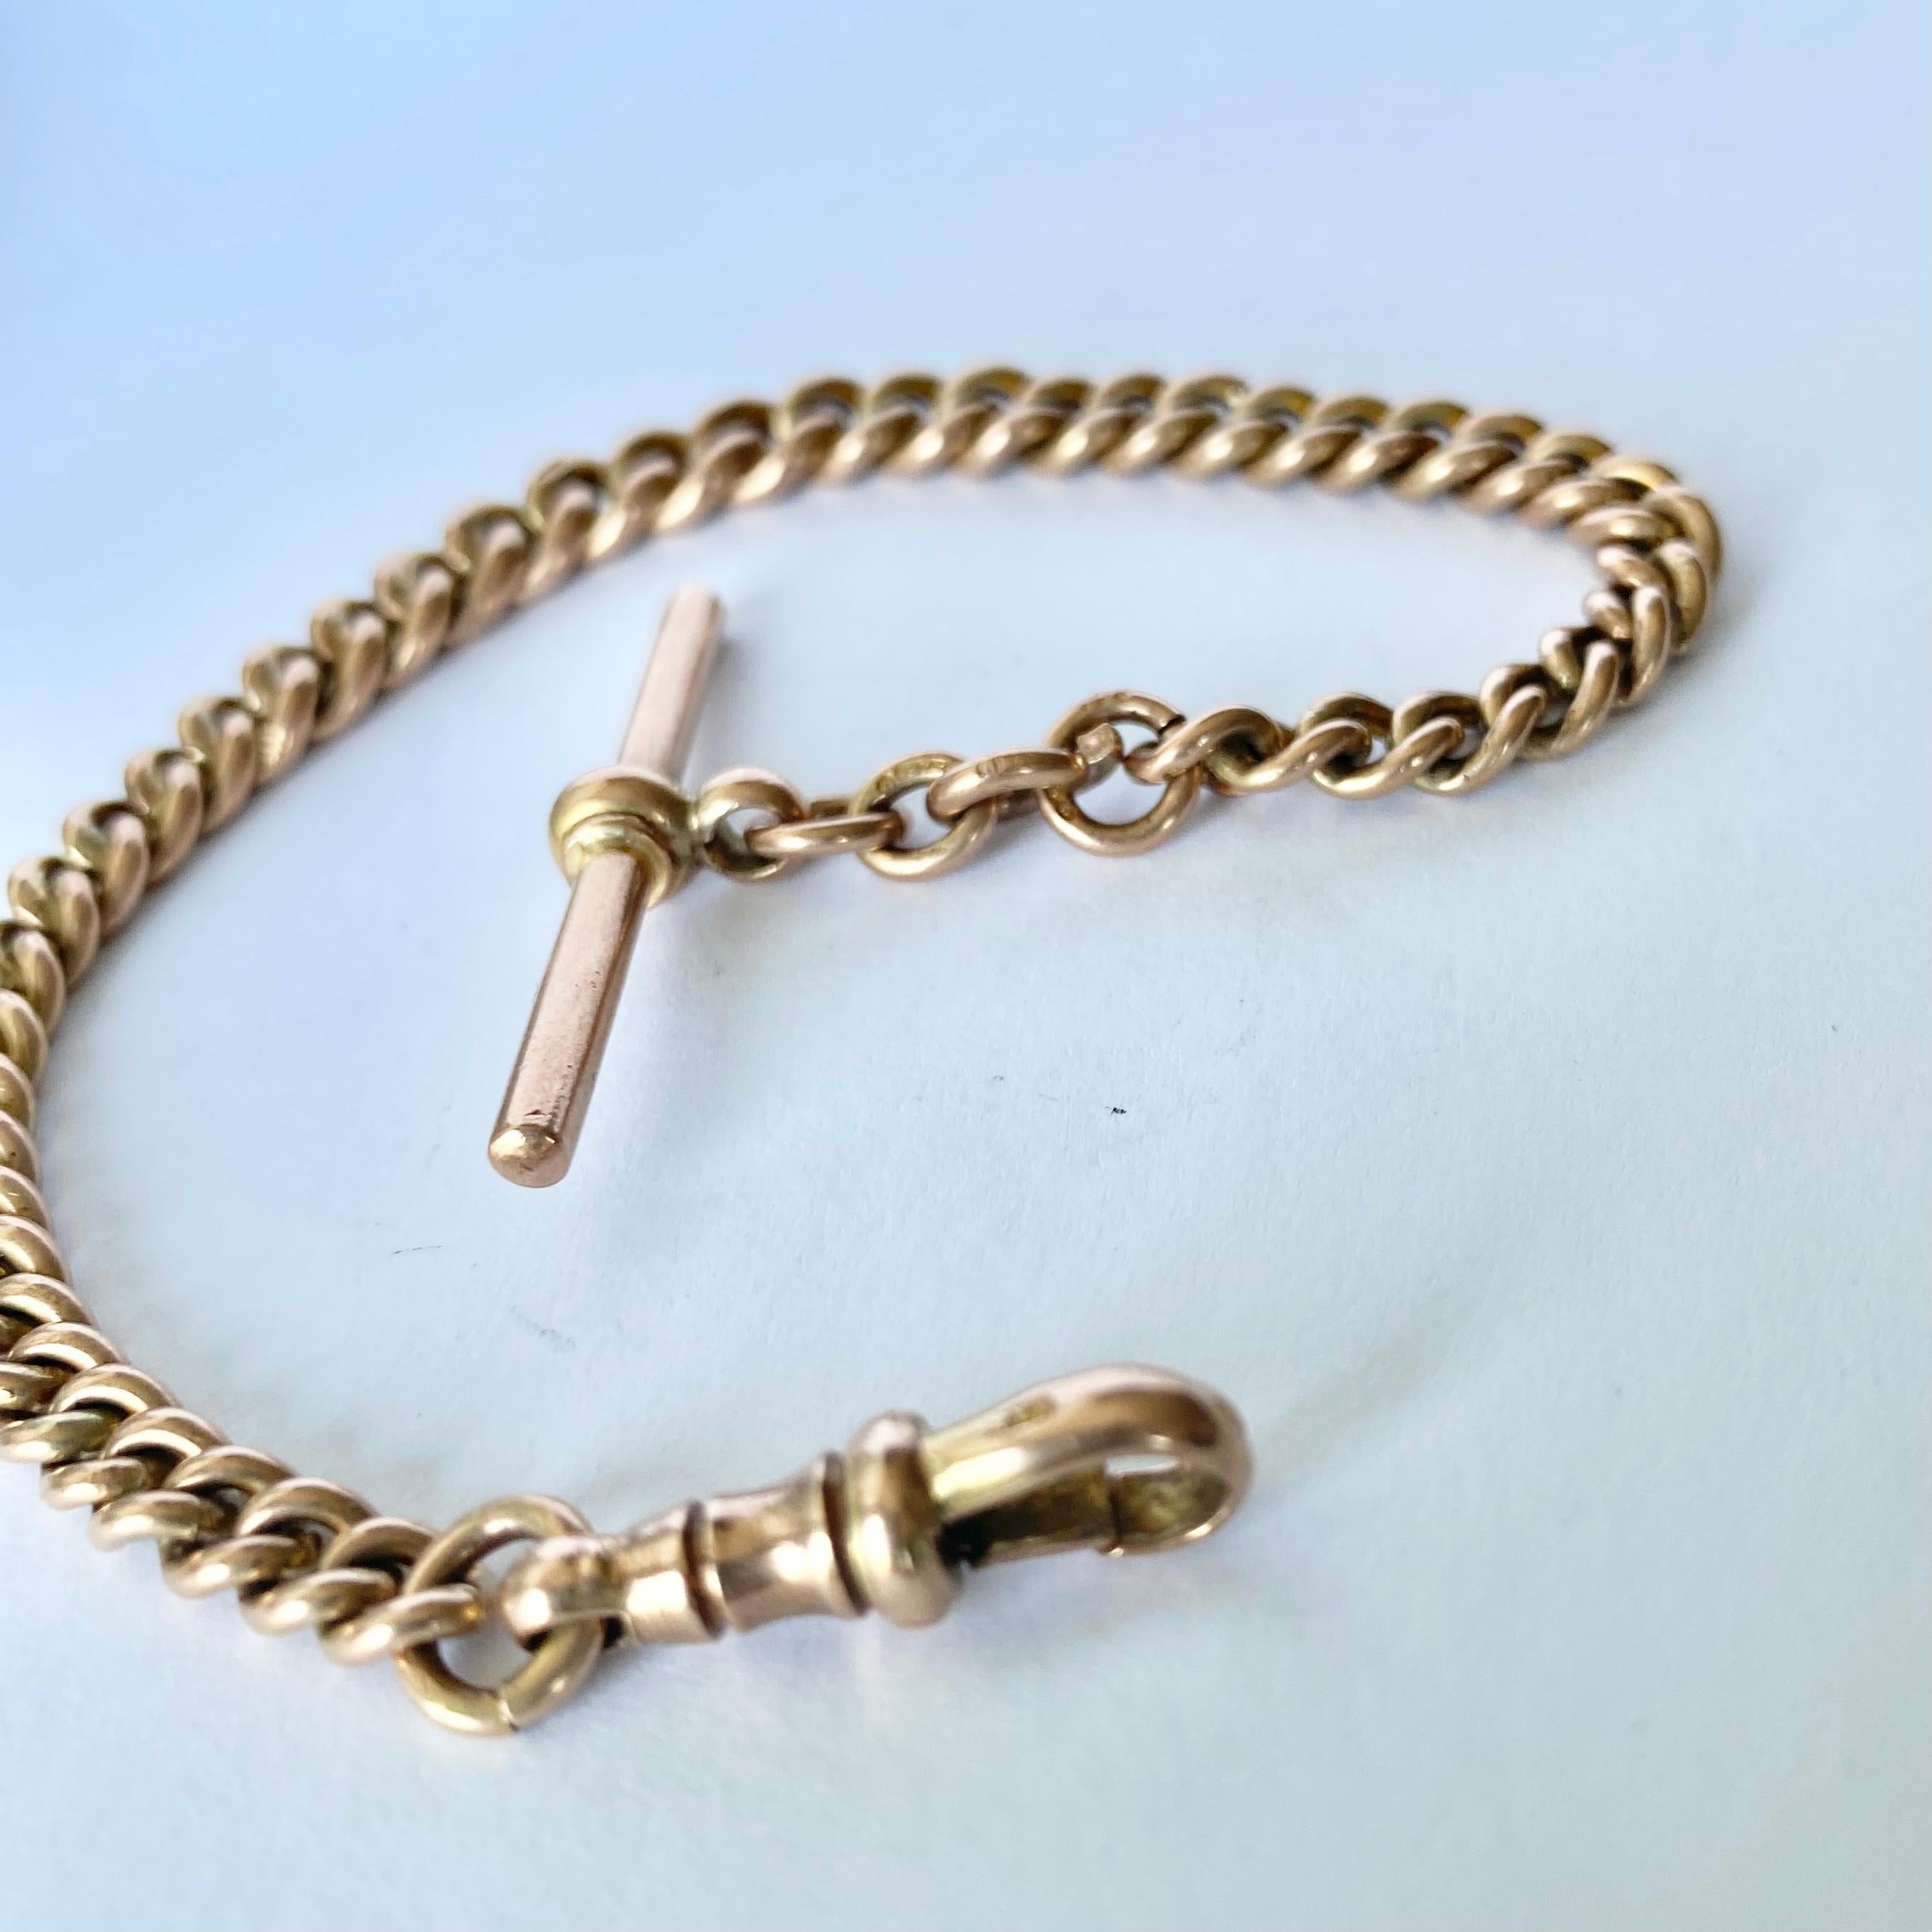 This glossy 9carat gold bracelet is made of solid gold and features a dog clip one end and a t-bar on the other.  Every curb link is hallmaked.

Length: 20cm
Width: 6-4.5mm

Weight: 22g